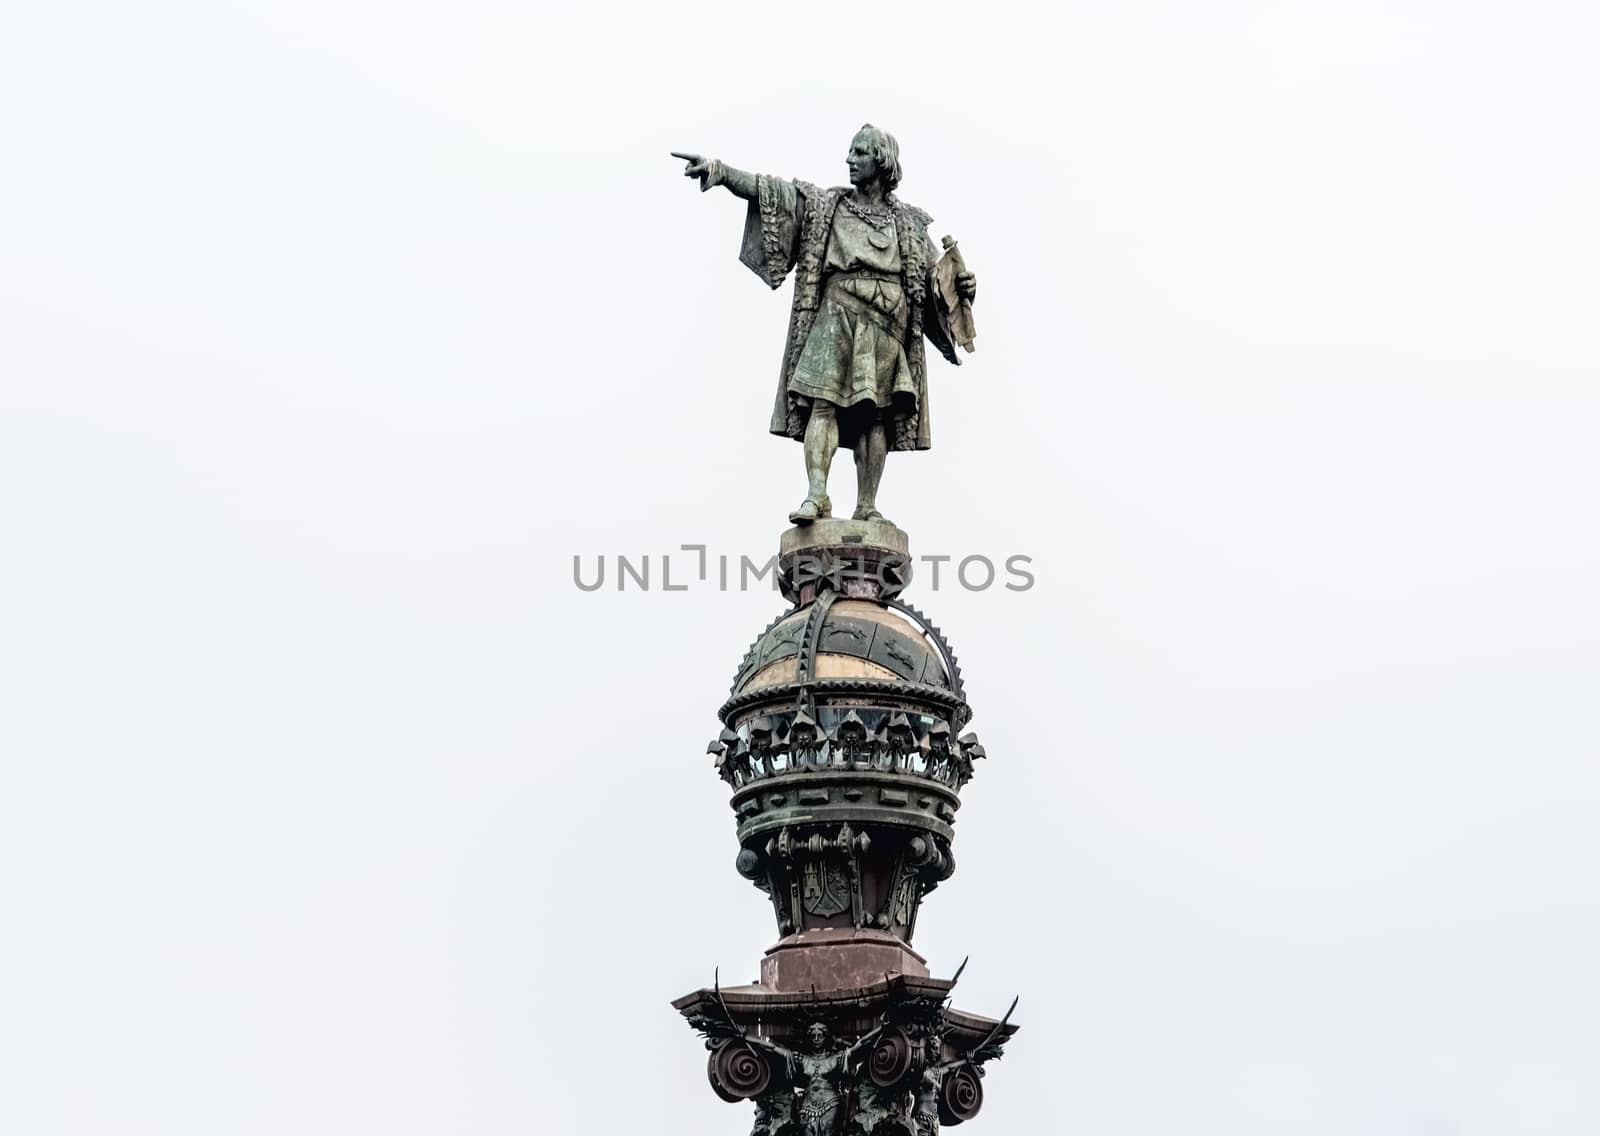 Statue of Christopher Columbus in Barcelona, Spain by Marcus